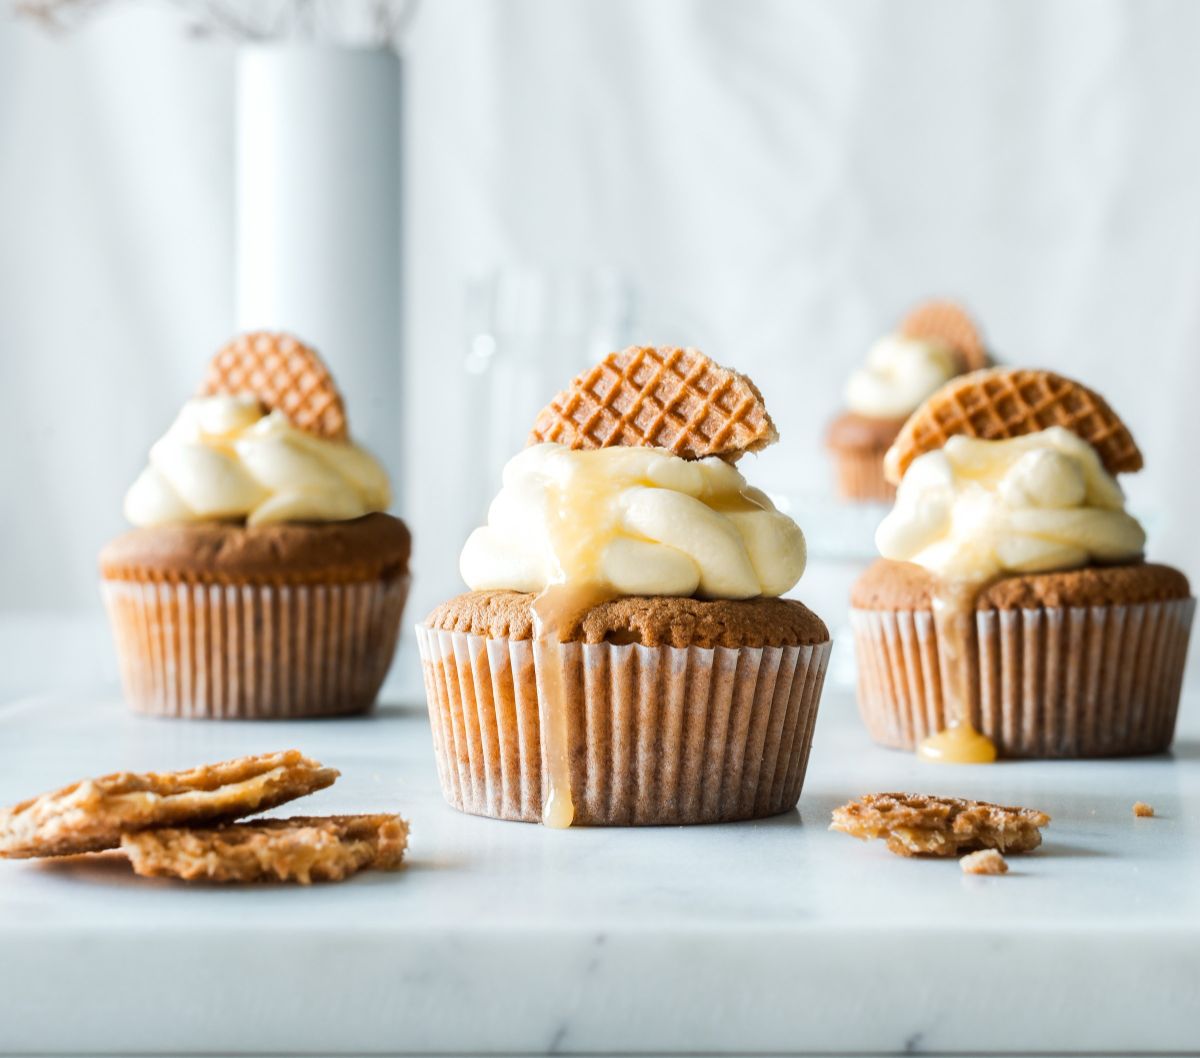 Cupcake Recipes Easy with 3 Tasty and Moist Results